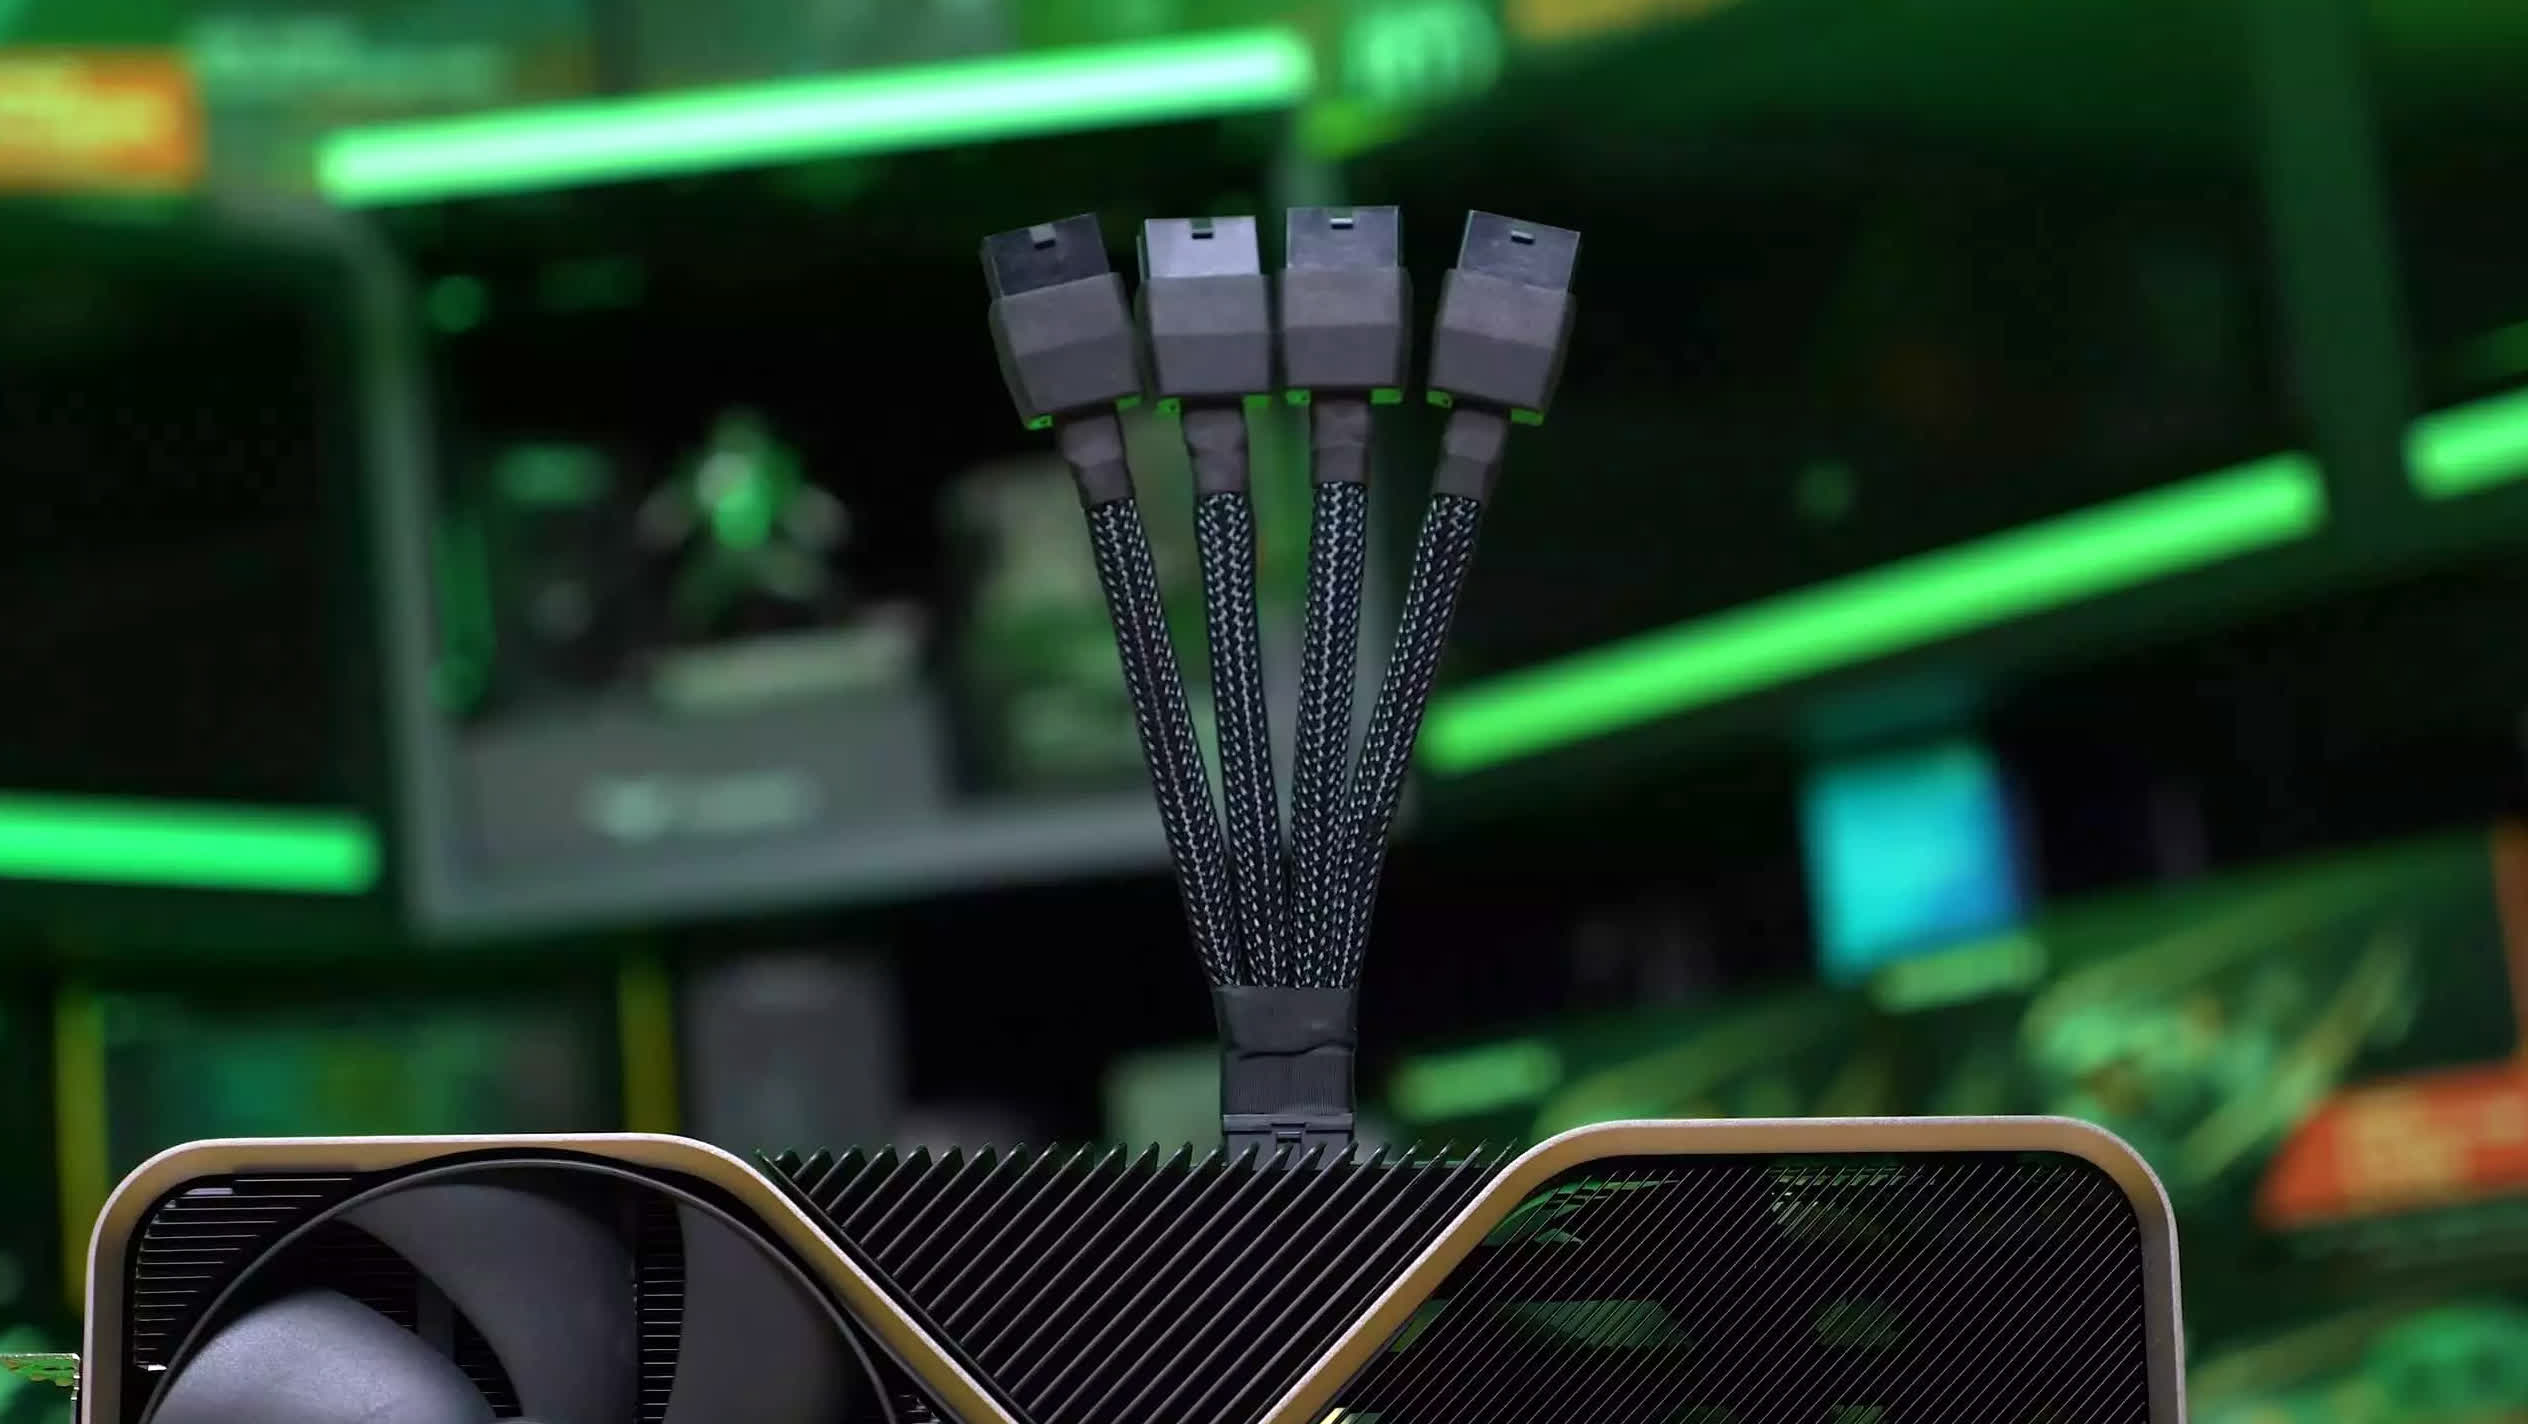 Poorly manufactured adapter responsible for melting Nvidia RTX 4090 cables, report claims